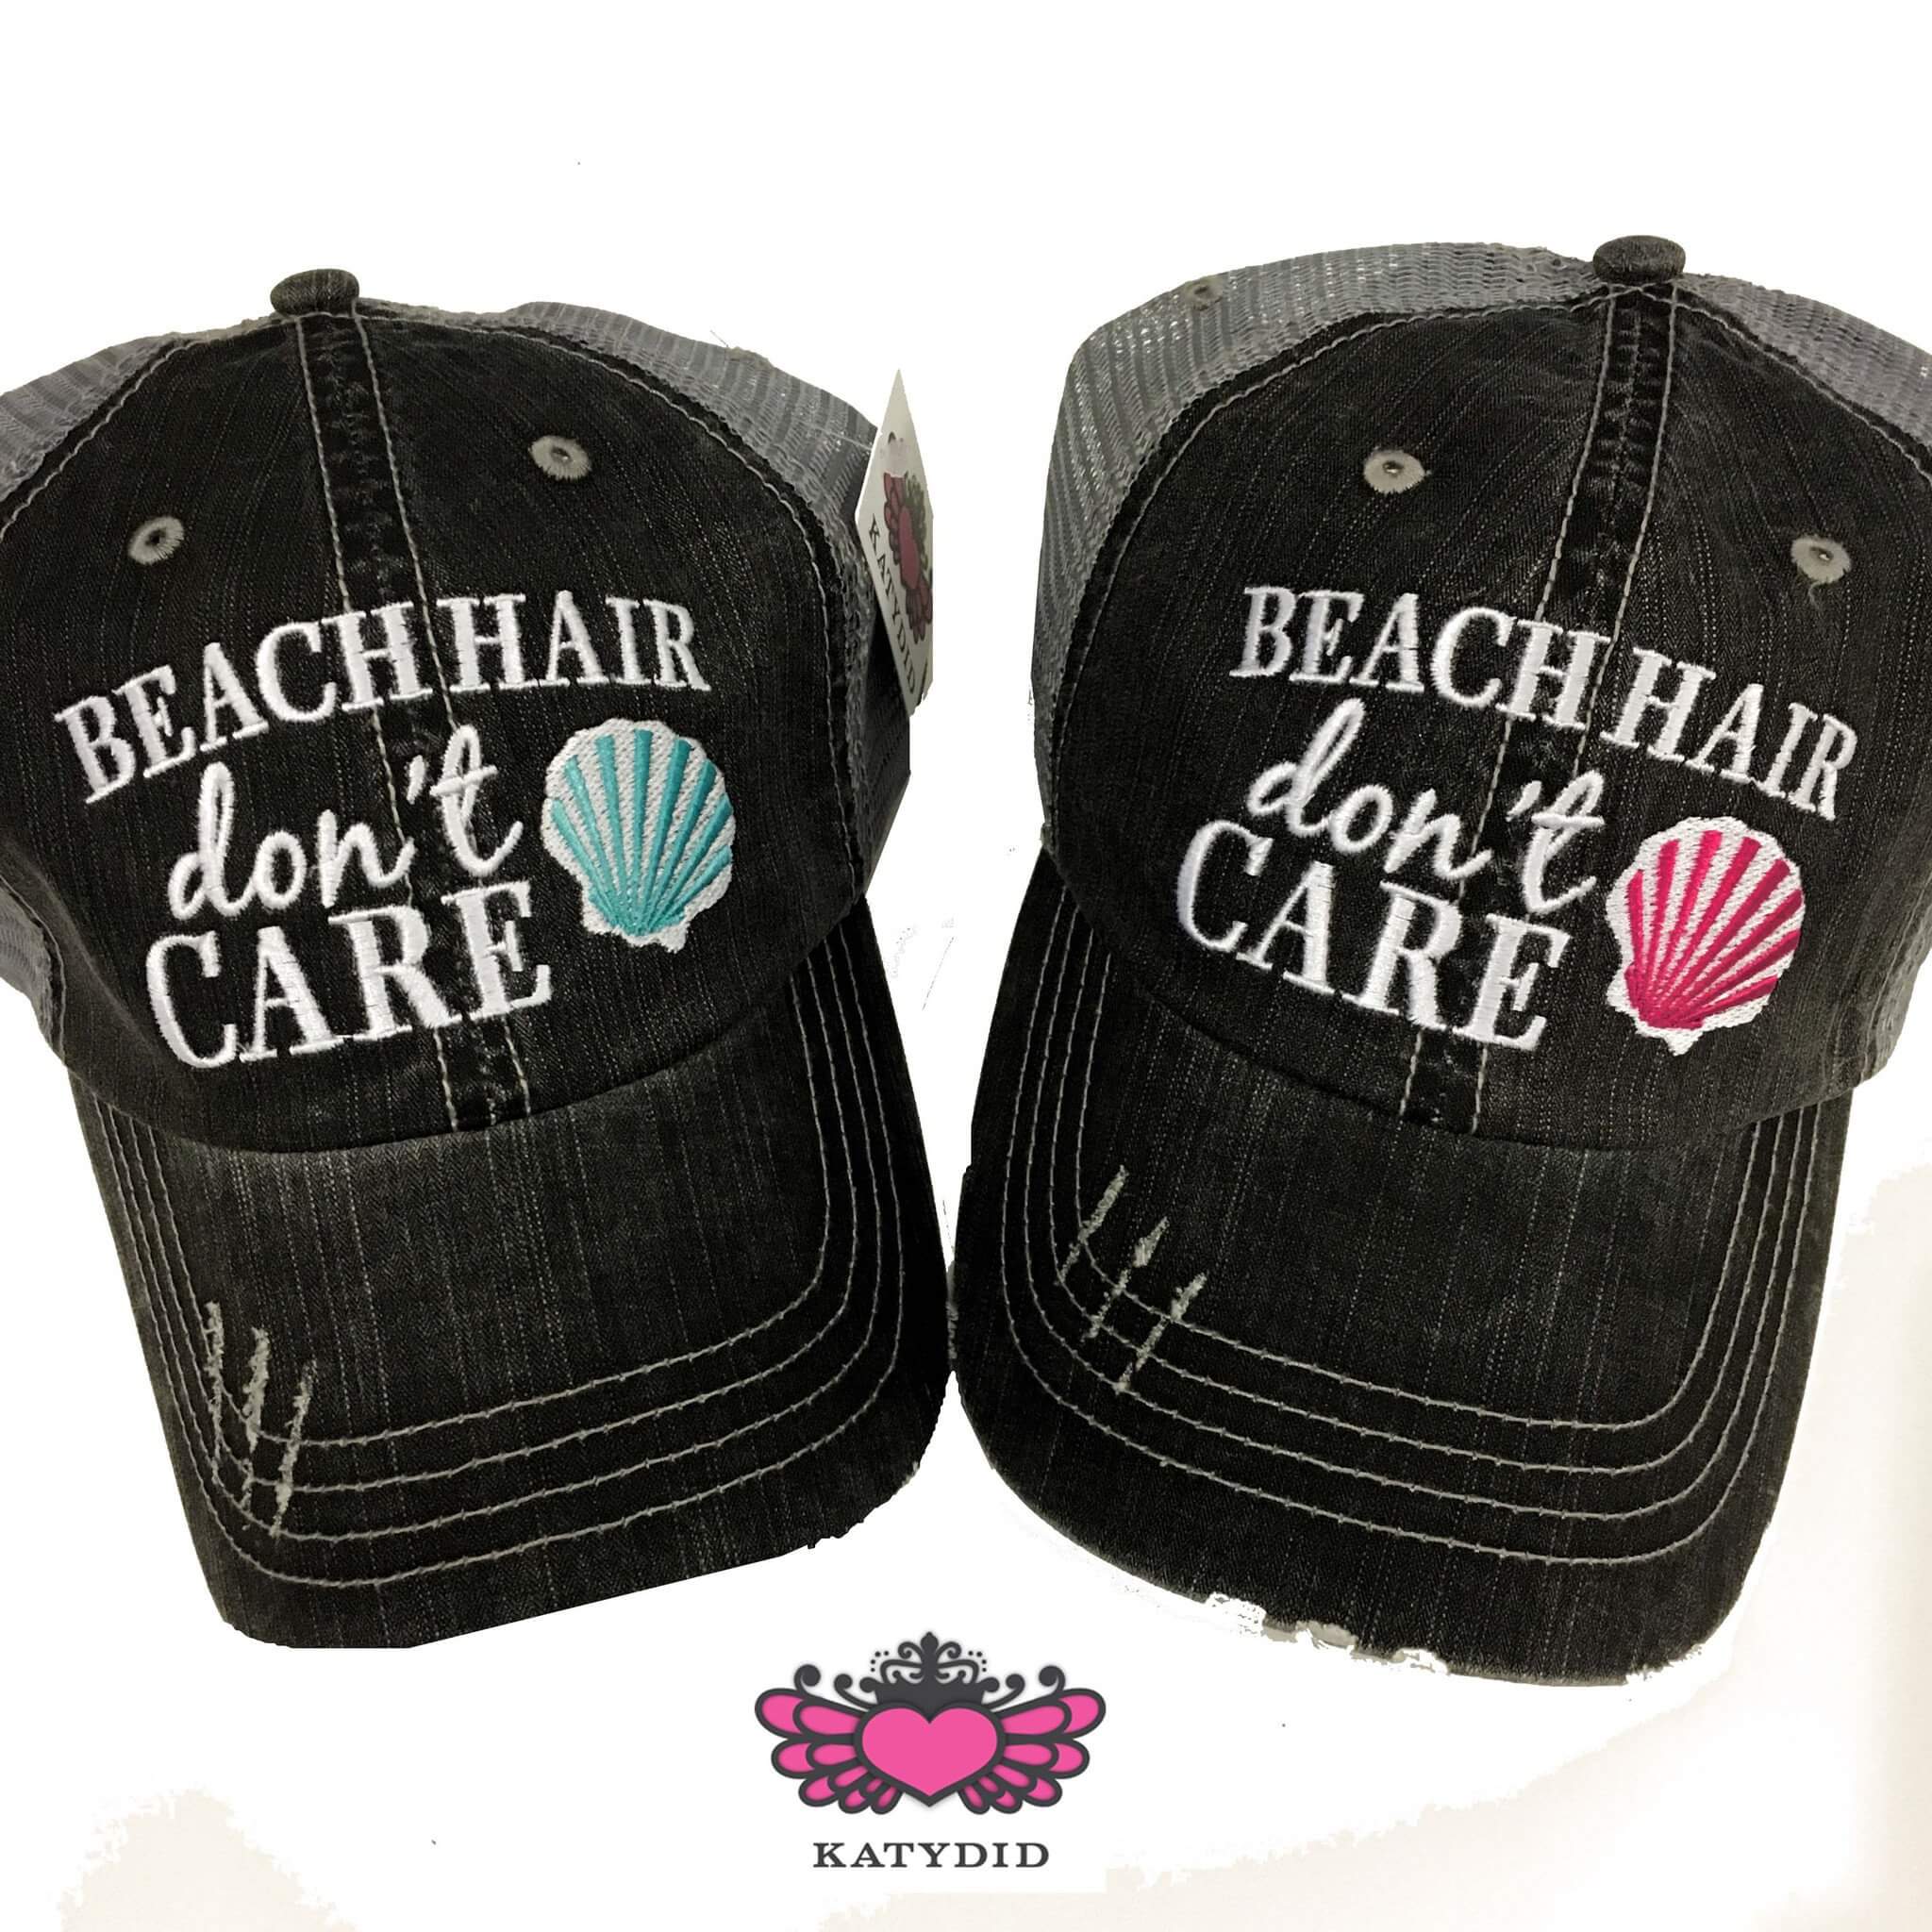 "BEACH HAIR DON'T CARE" TRUCKER HAT - 2 COLOR OPTIONS